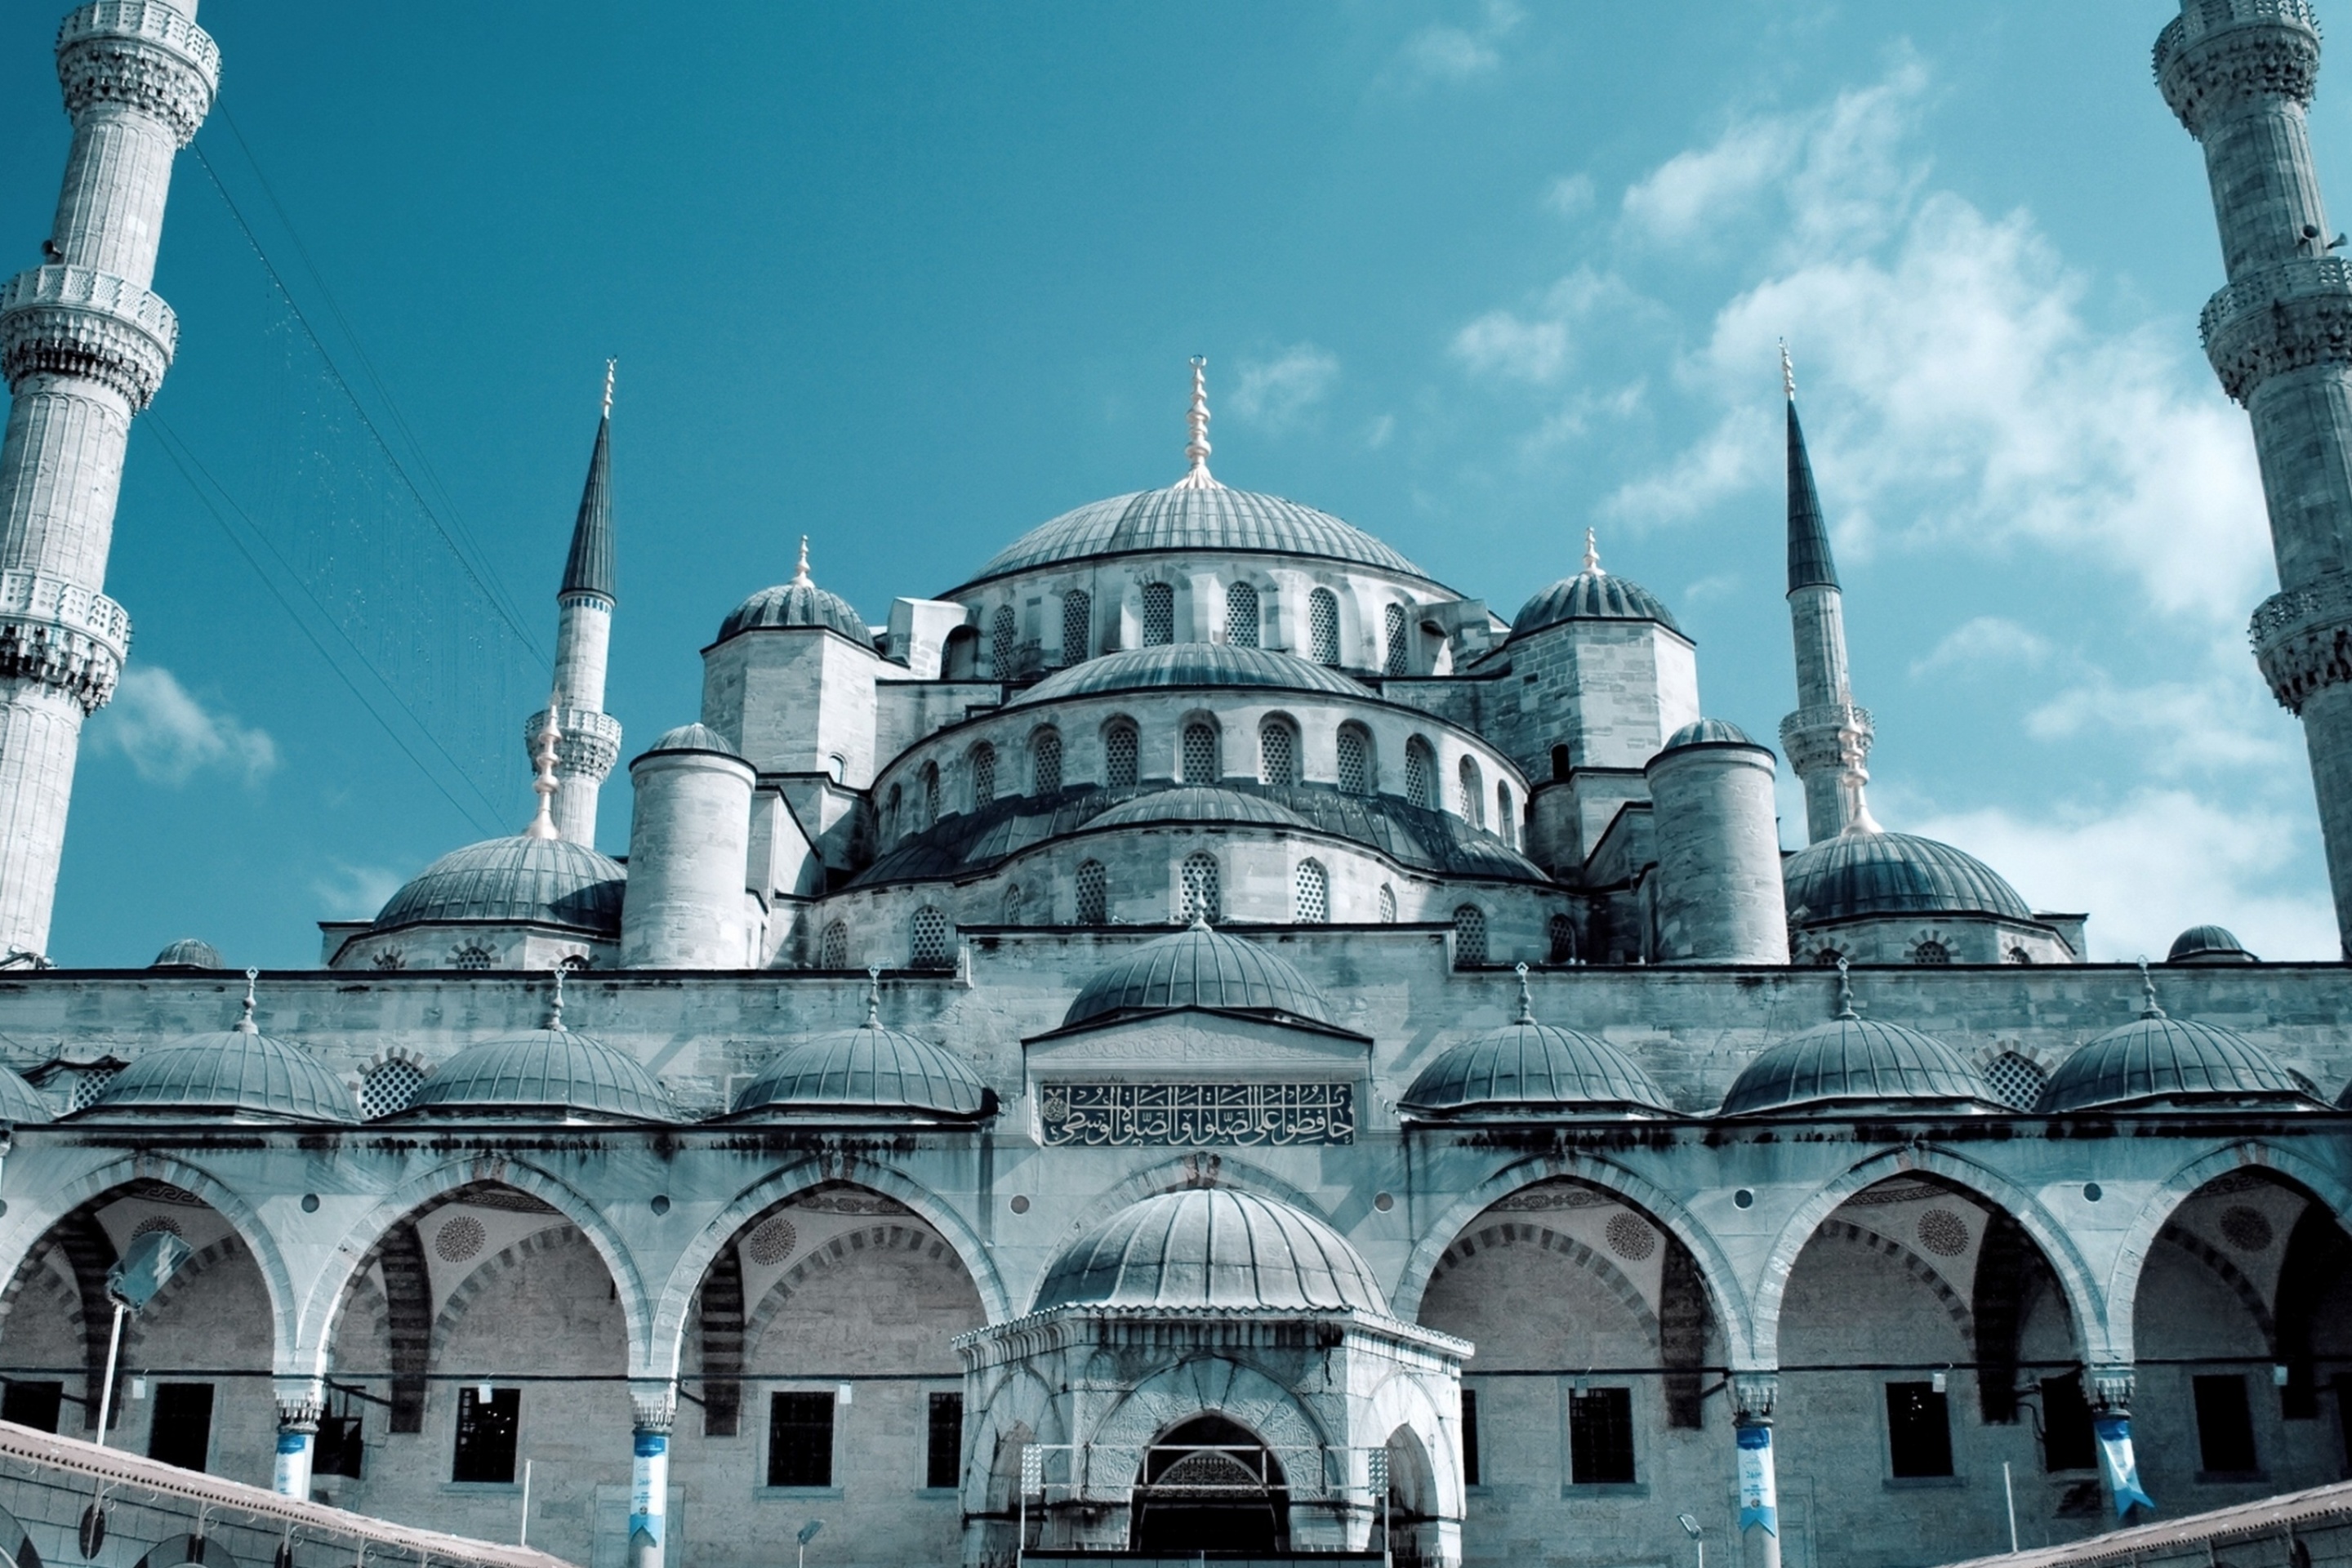 Sultan Ahmed Mosque in Istanbul screenshot #1 2880x1920